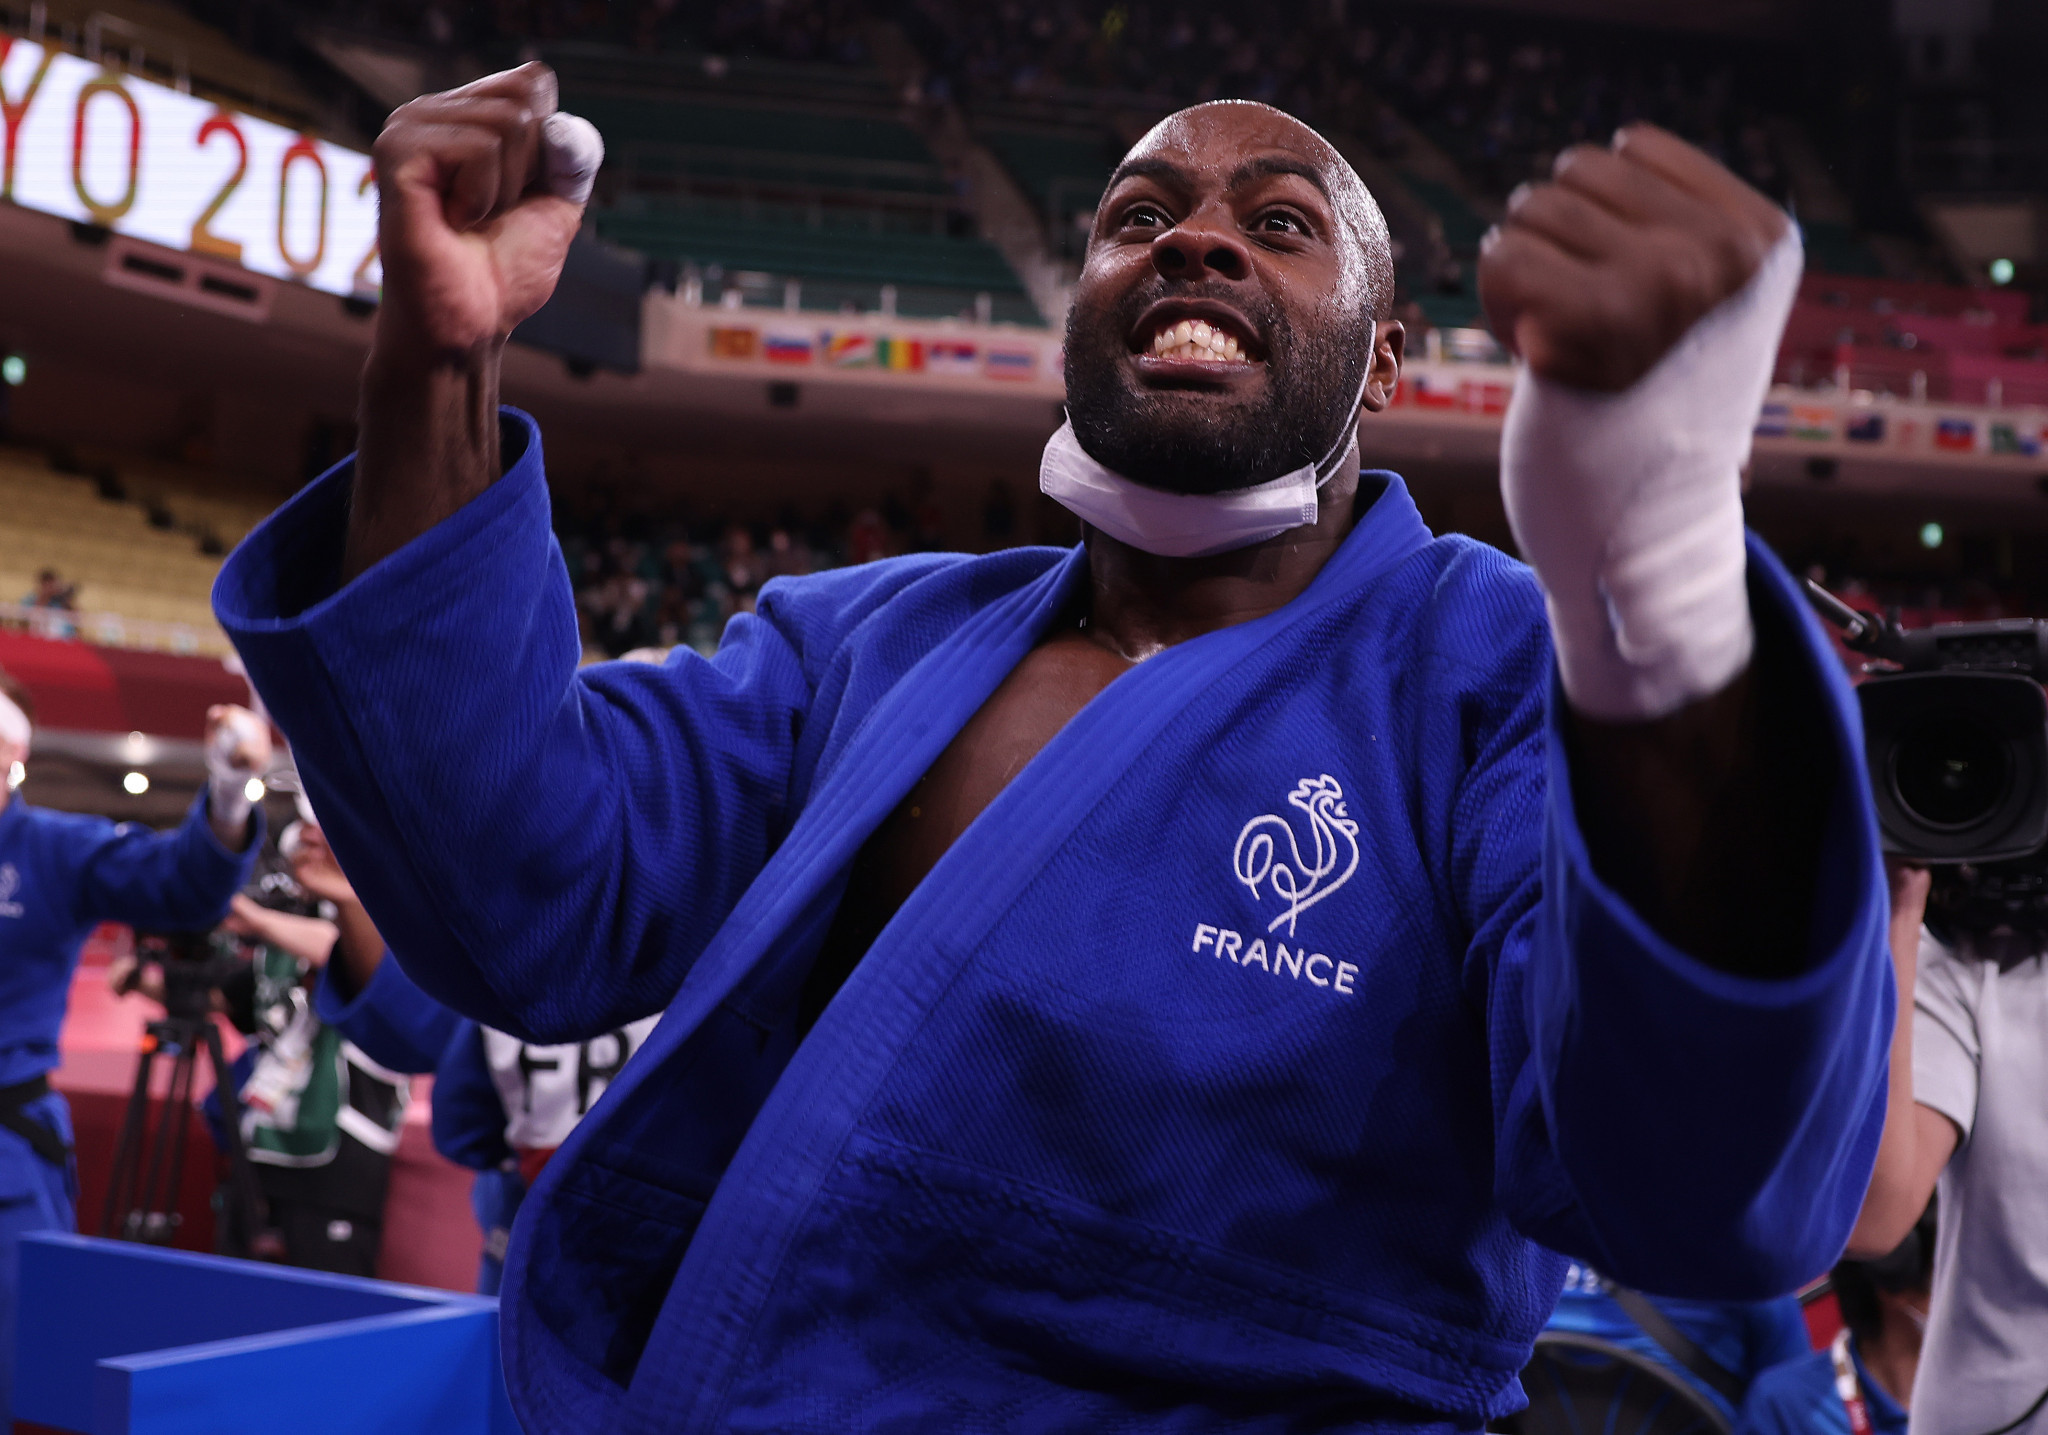 Judo legend Riner launches new textile brand Fightart